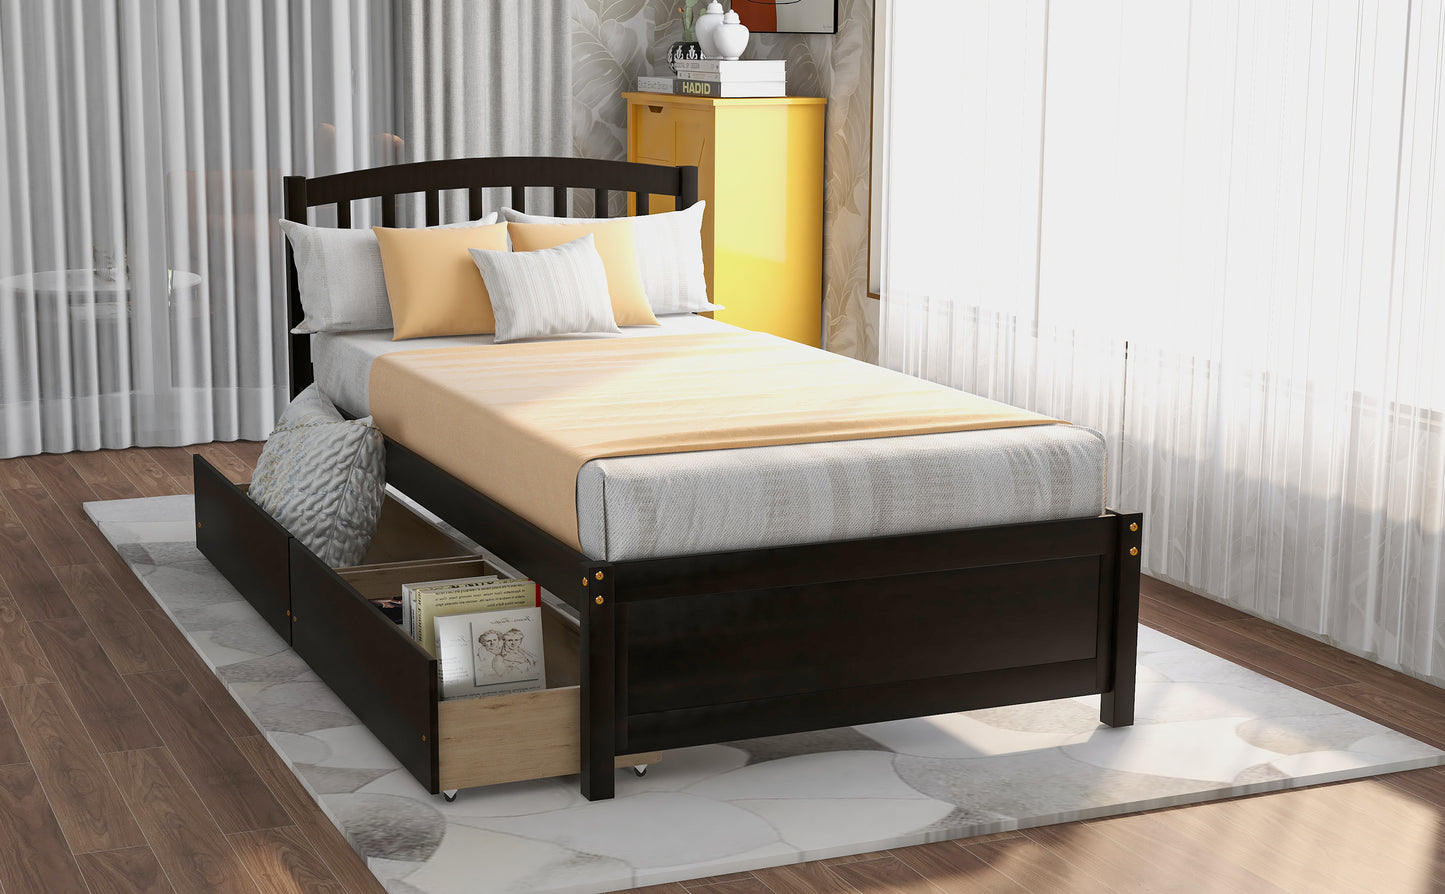 Twin Platform Storage Bed Wood Bed Frame with Two Drawers and Headboard, Espresso（Previous SKU: SF000062PAA）